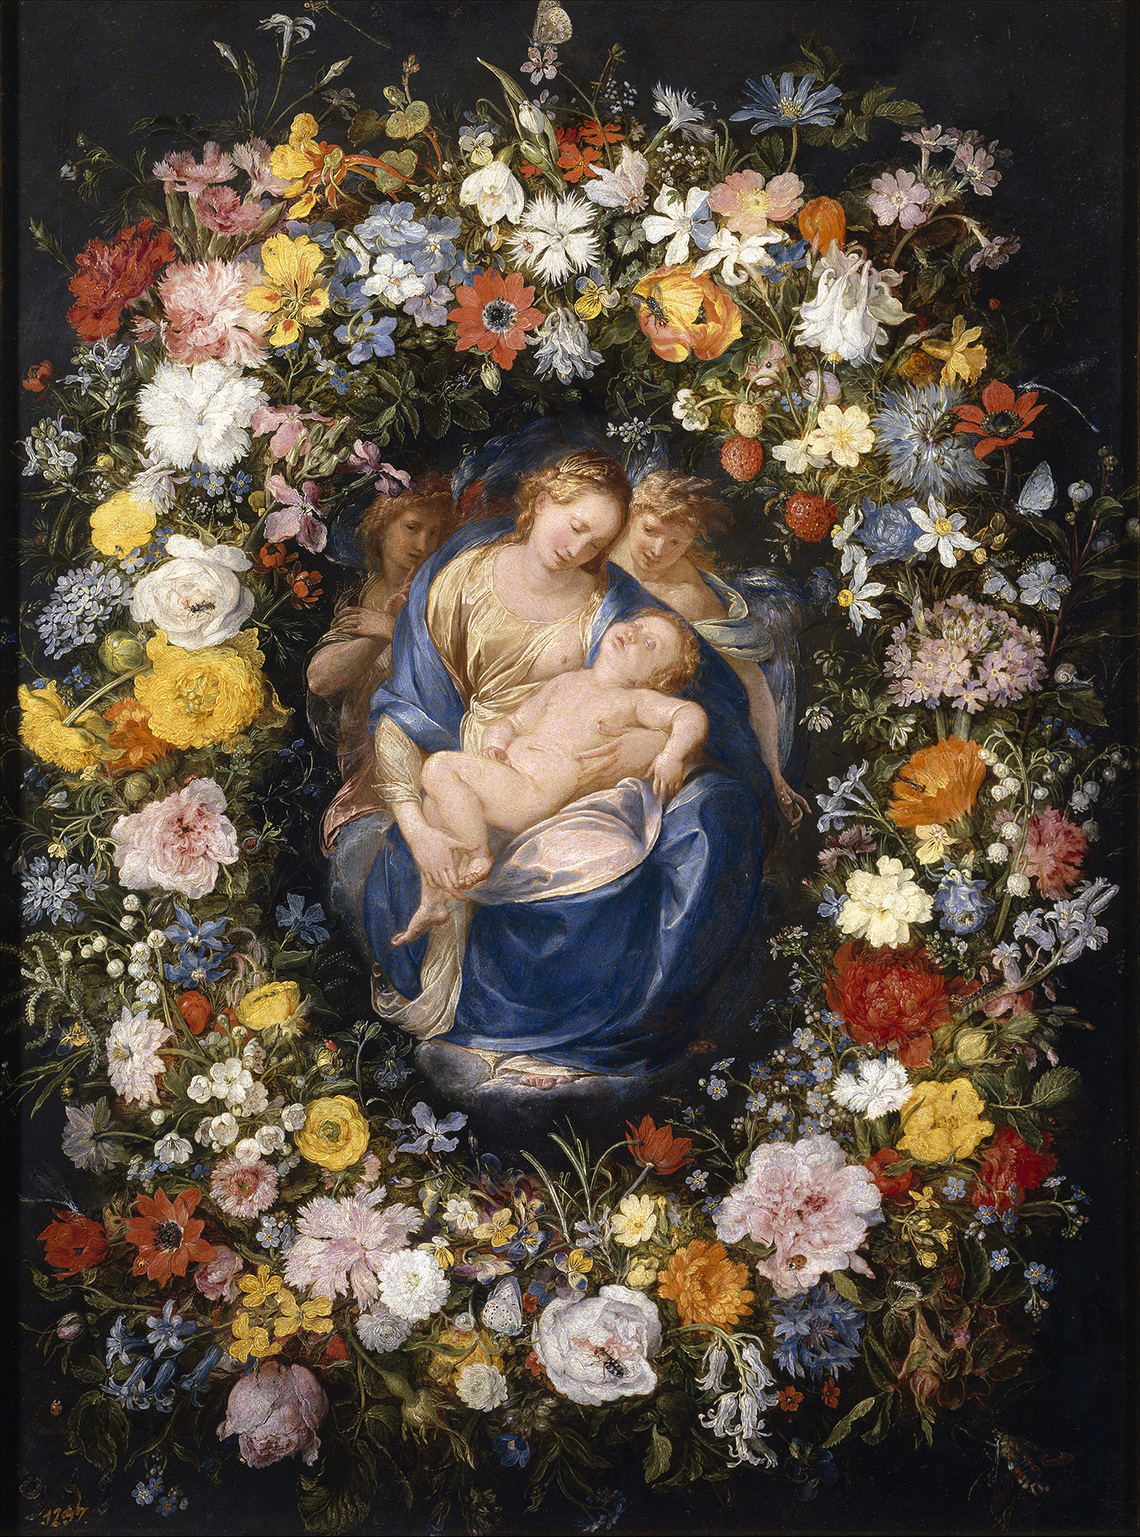 Madonna and Child in a Flower Garland (Madrid)